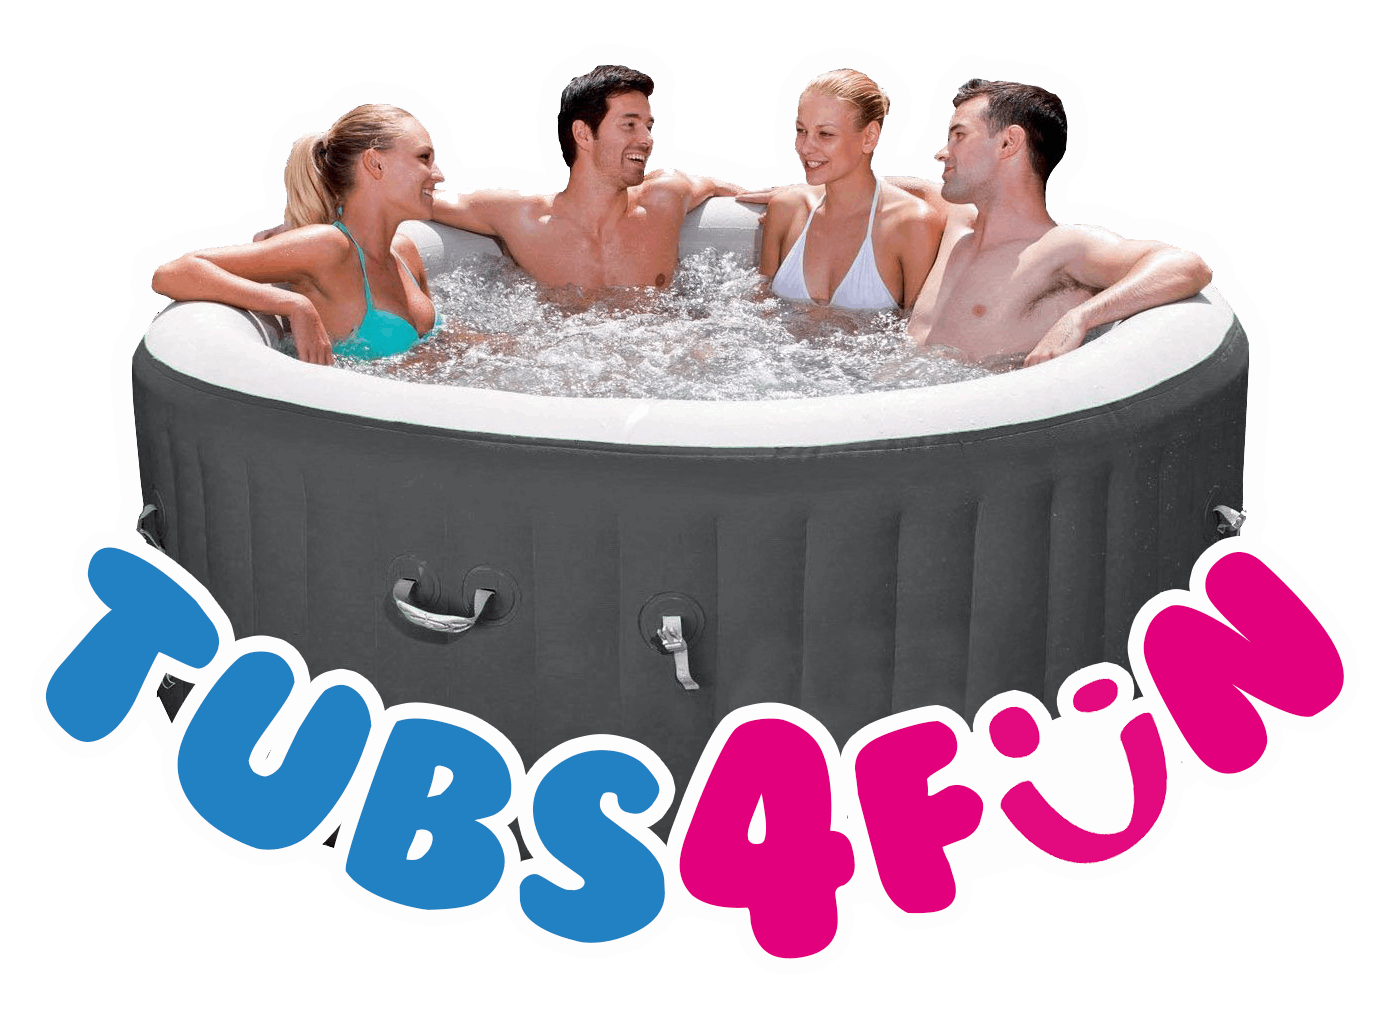 14 16 Seater Hot Tubs Hot Tub And Hot Tub Cinema Hire In Buckinghamshire Berkshire Middlesex